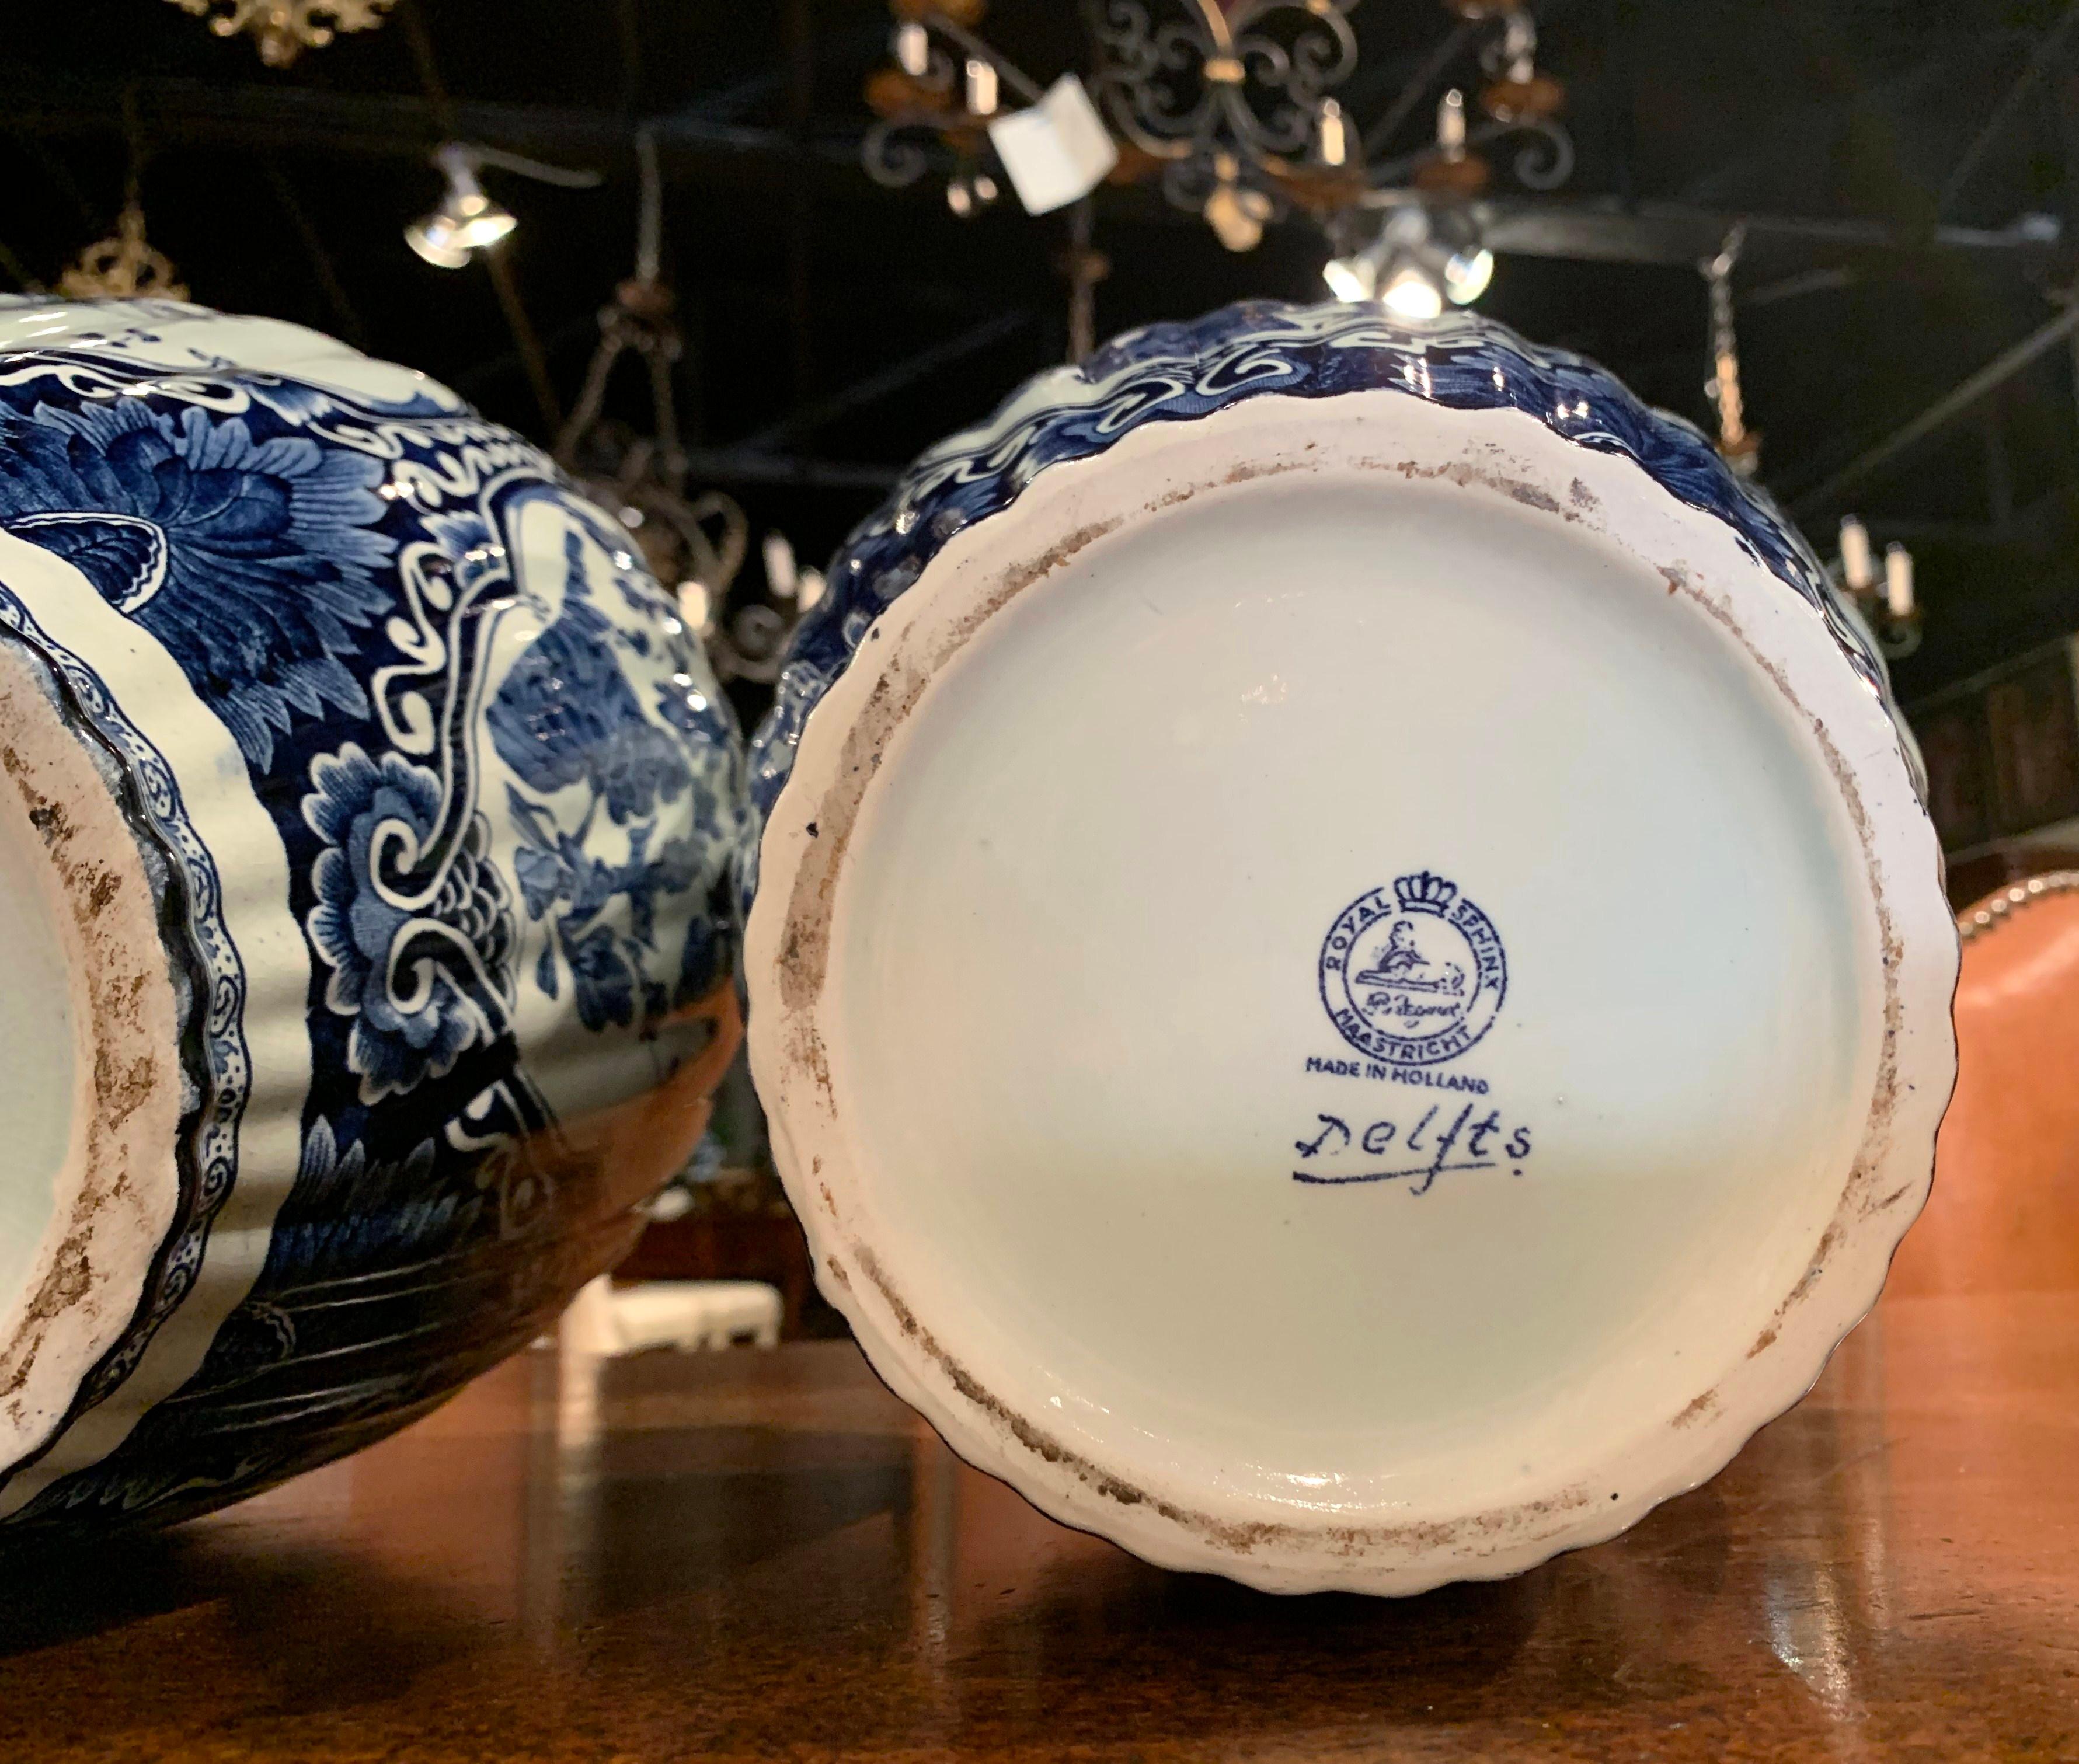 Pair of Mid-20th Century Dutch Blue and White Royal Maastricht Delft Ginger Jars 2